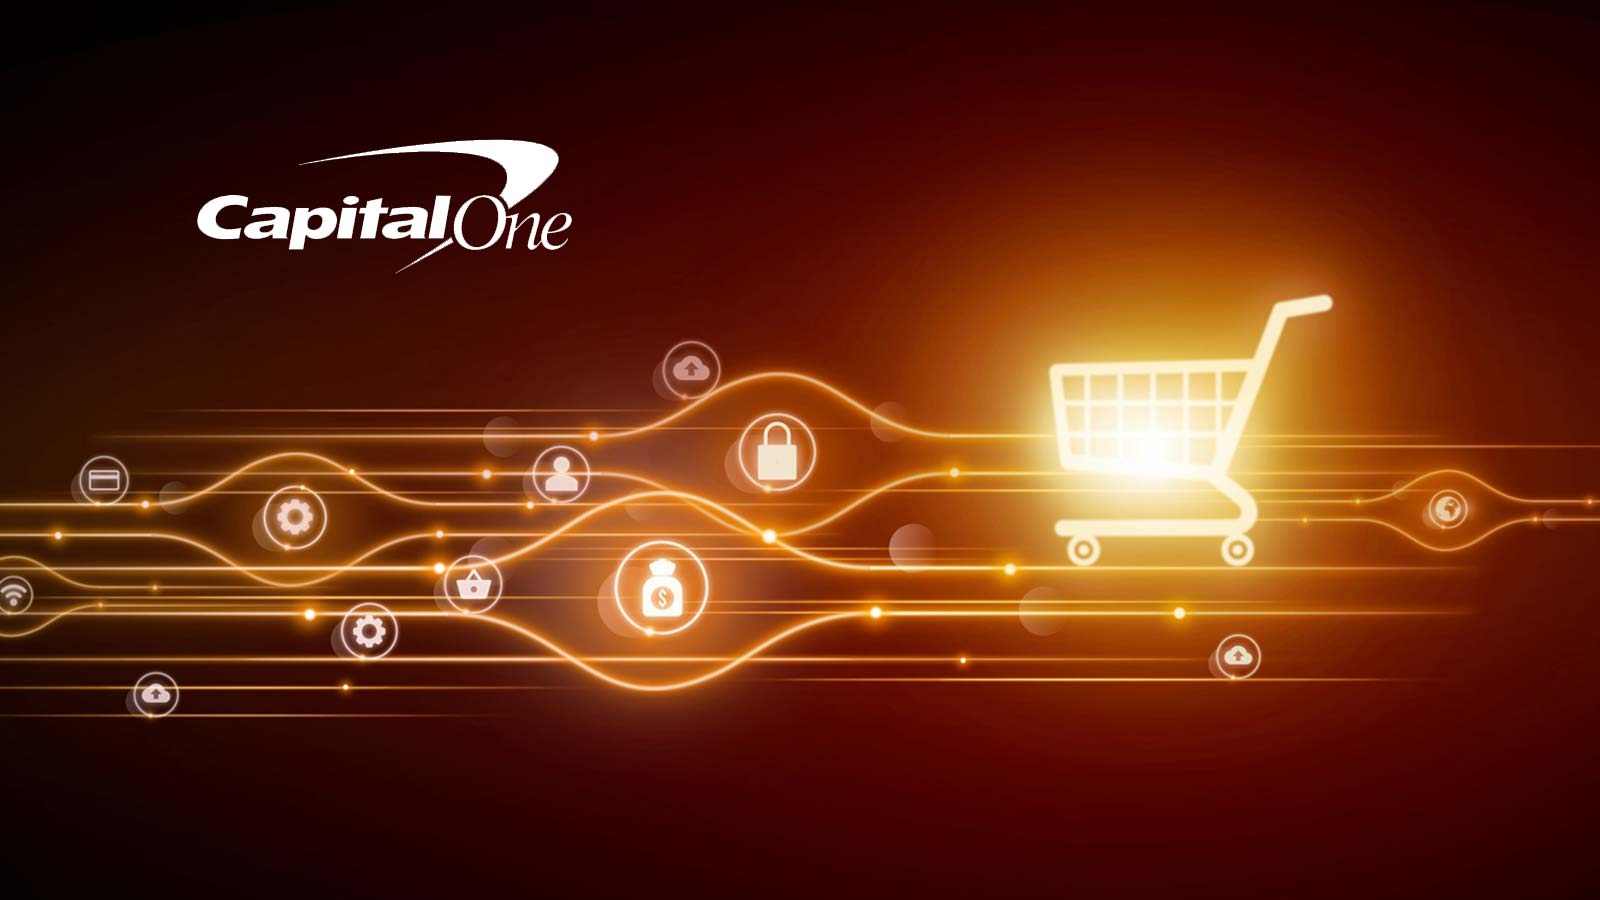 Capital One Enters Enterprise B2B Software Market with Launch of Capital One Software Business